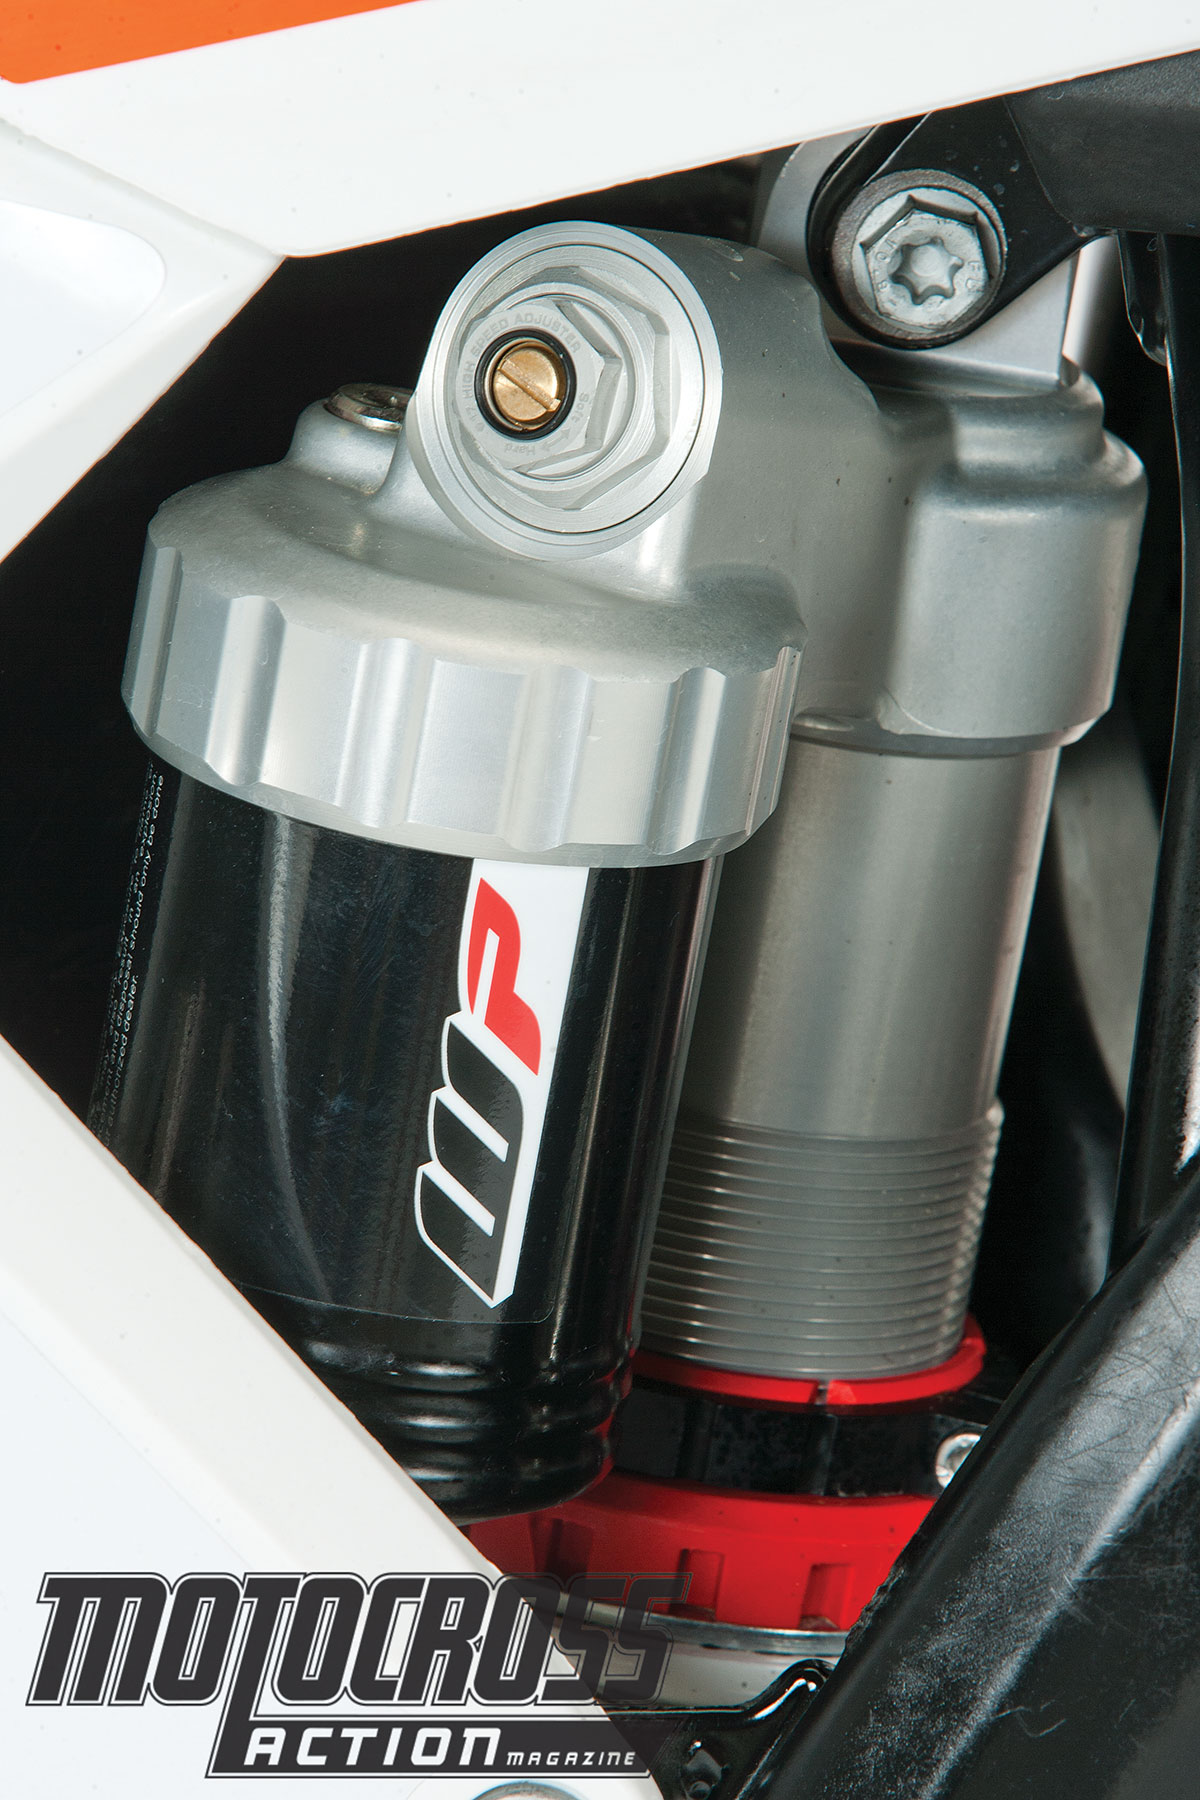 With the exception of the raw aluminum look of the shock reservoir cap, the rear suspension is basically the same.